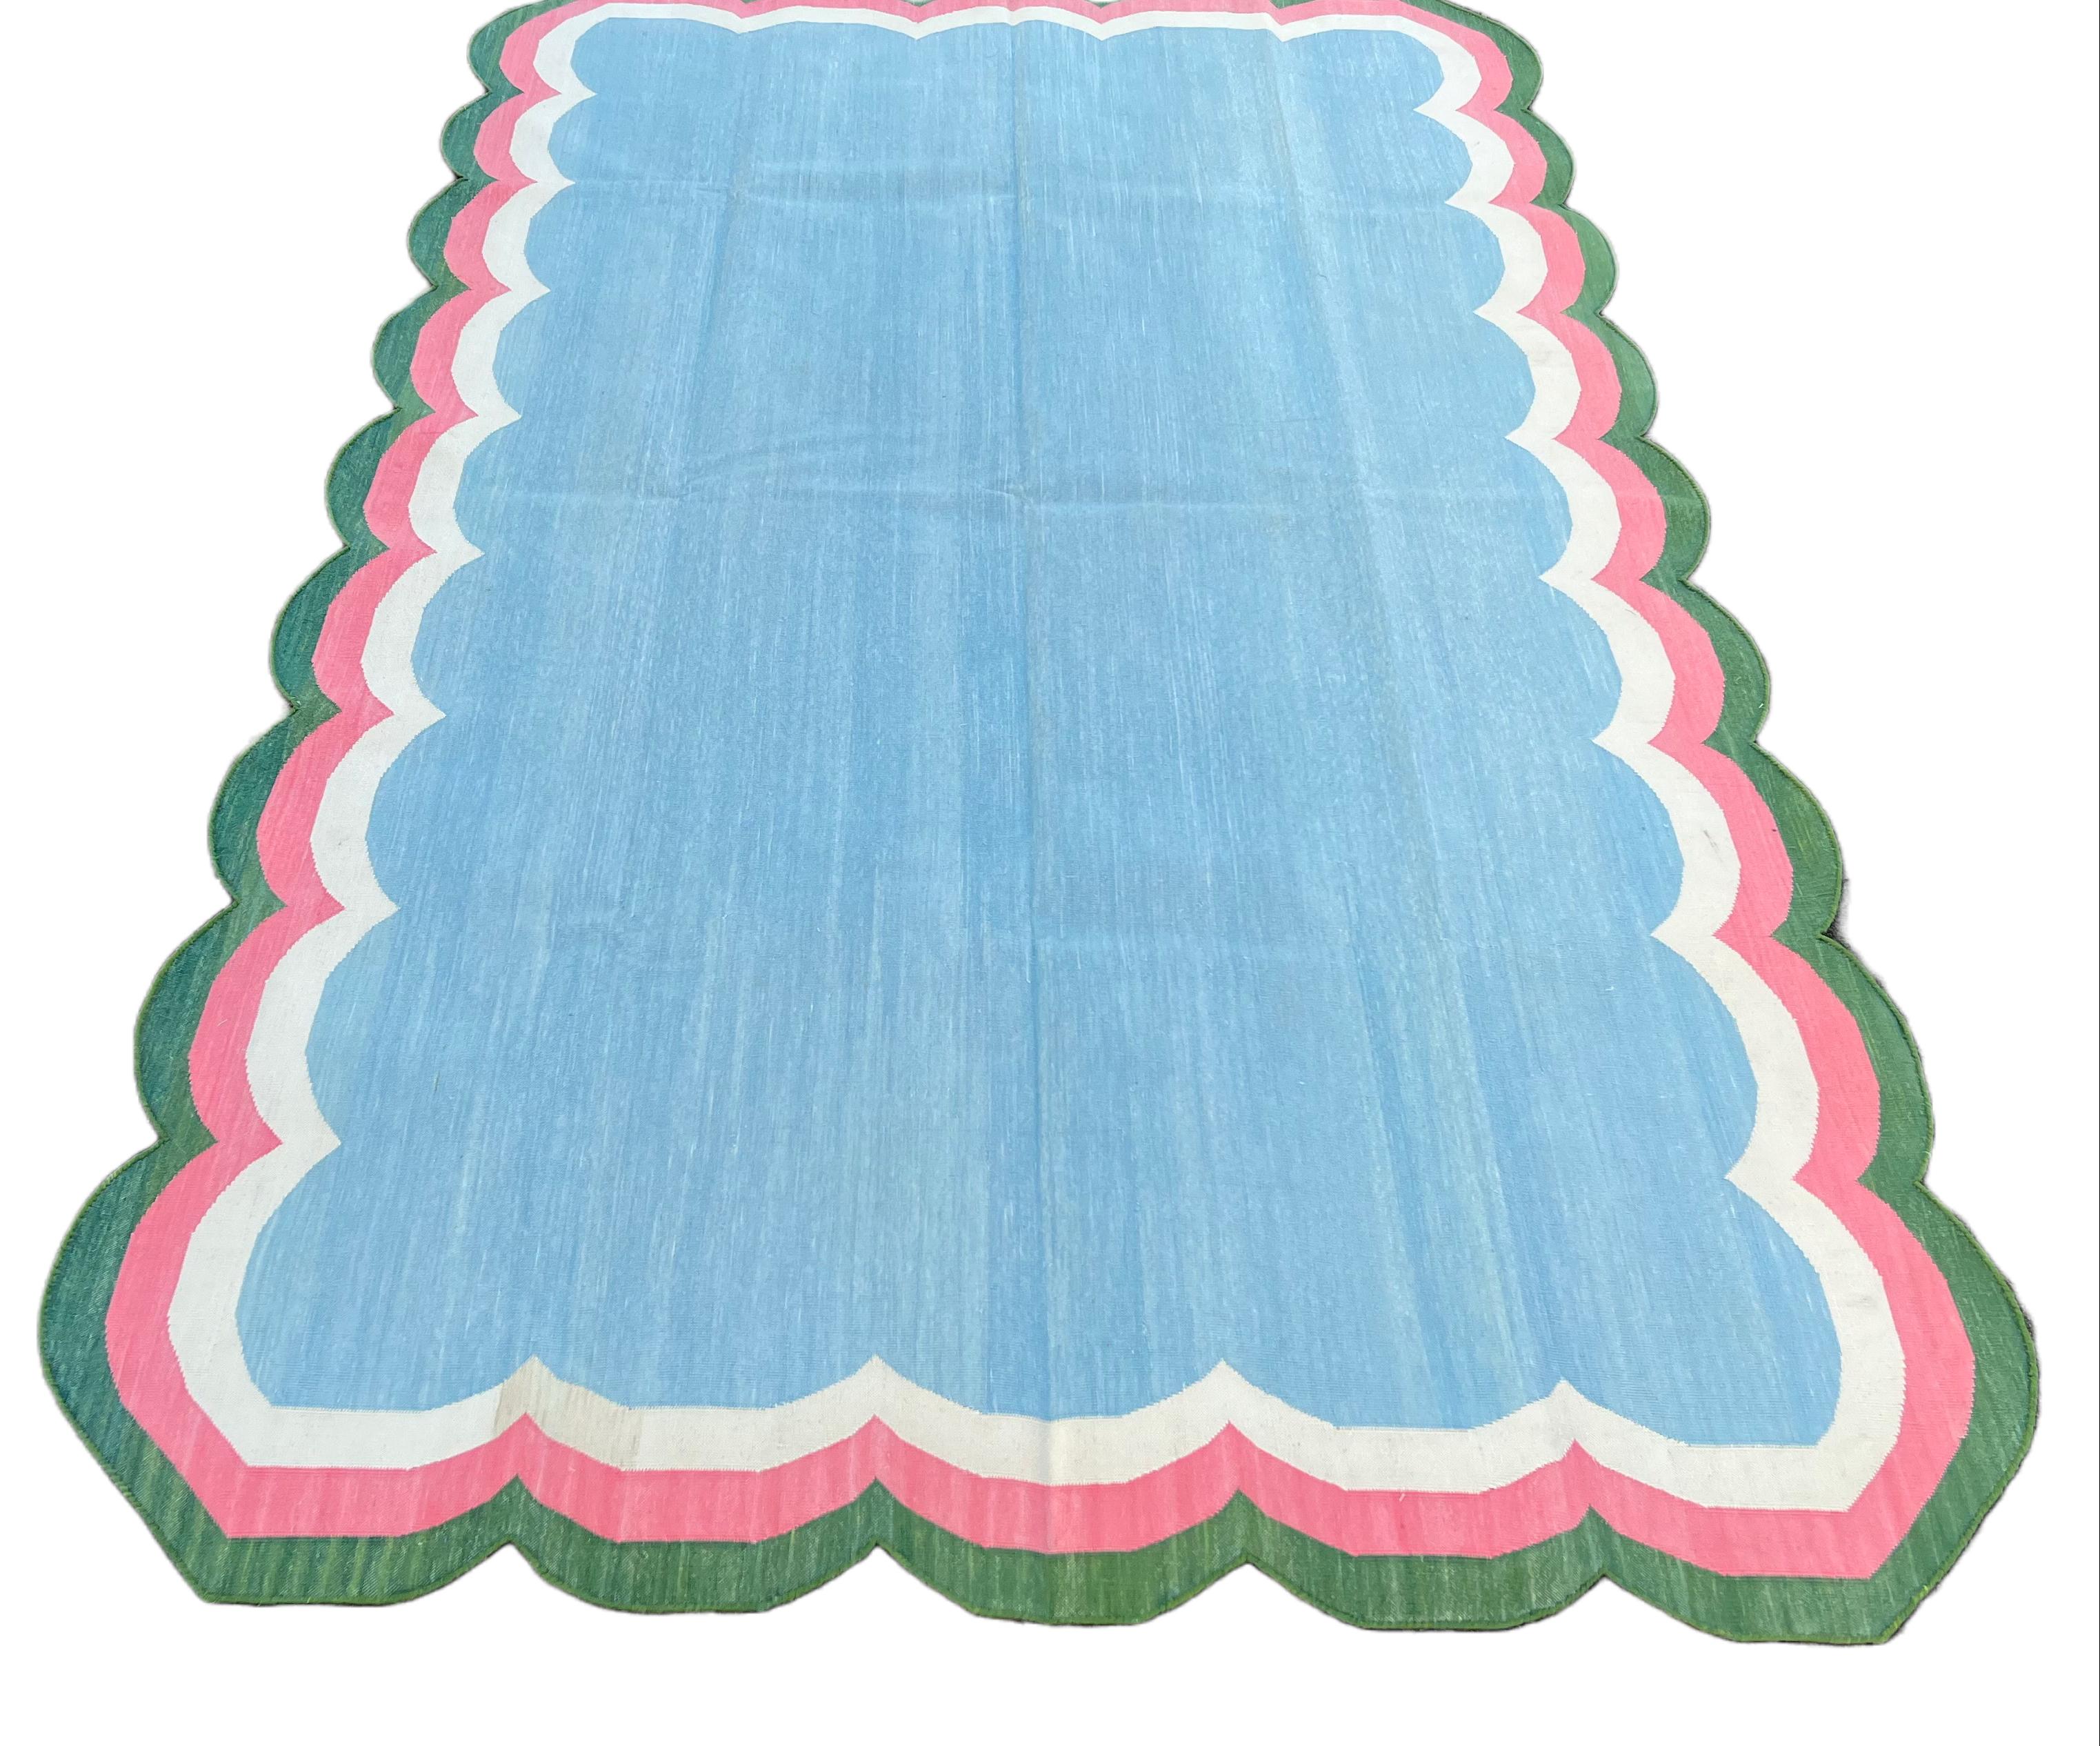 Contemporary Handmade Cotton Area Flat Weave Rug, Blue, Pink, Green Scalloped Indian Dhurrie For Sale